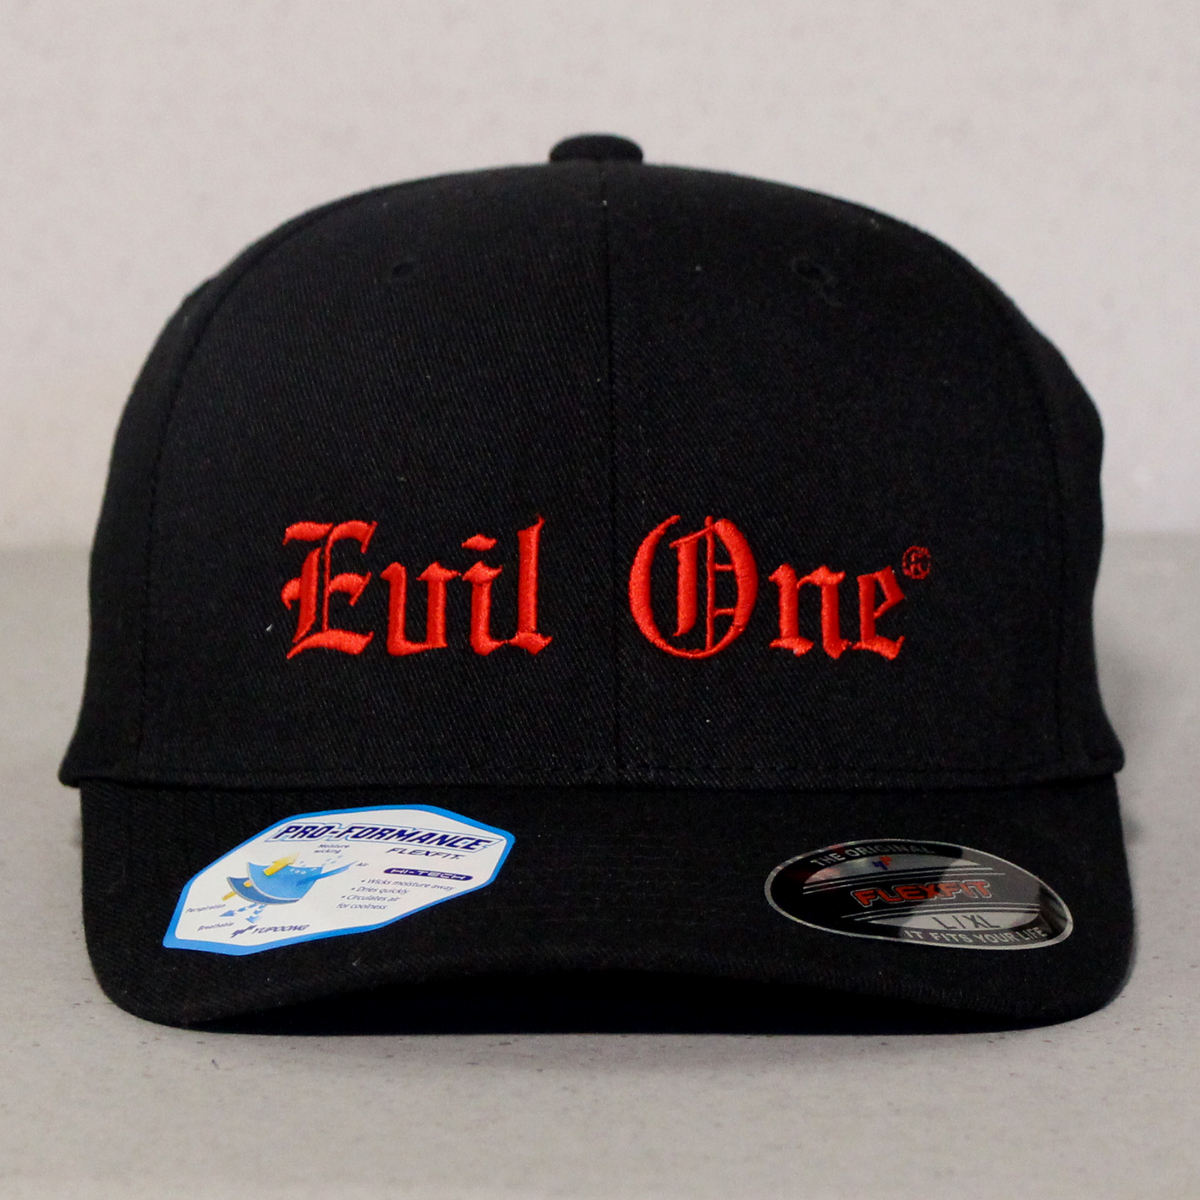 Biker Hat Black with Red Letters